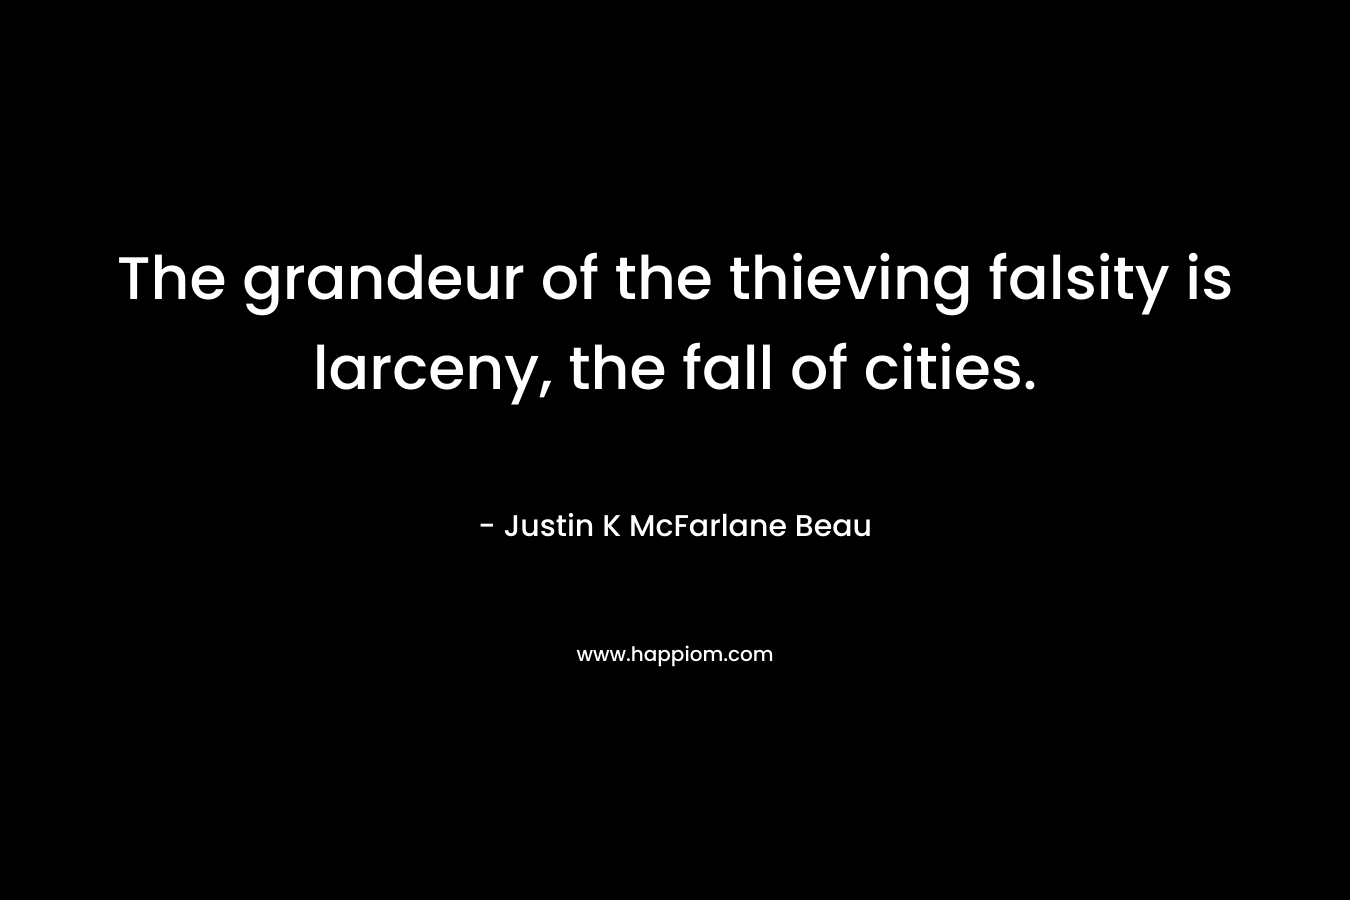 The grandeur of the thieving falsity is larceny, the fall of cities.